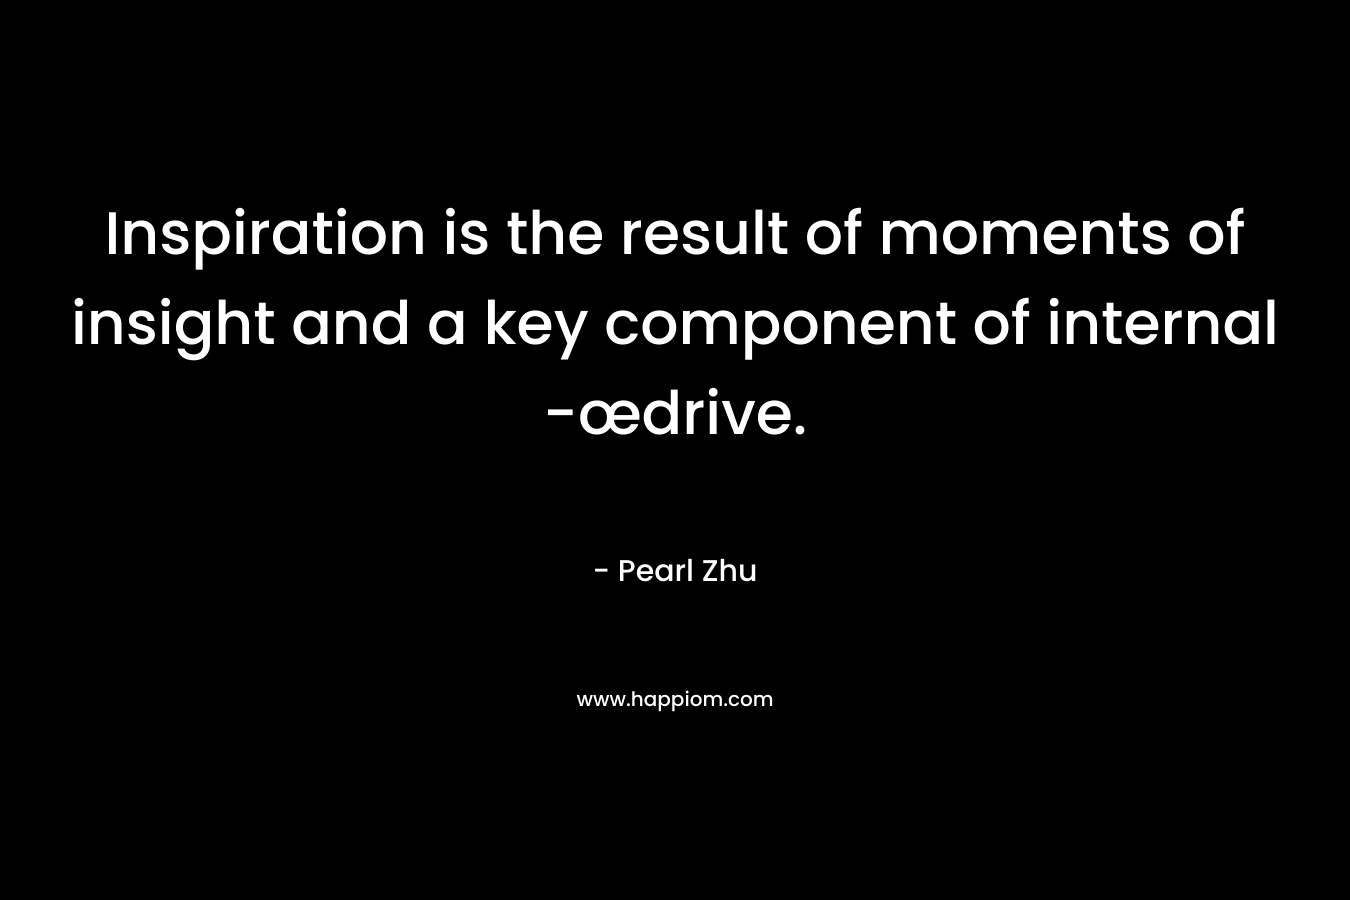 Inspiration is the result of moments of insight and a key component of internal -œdrive. – Pearl Zhu